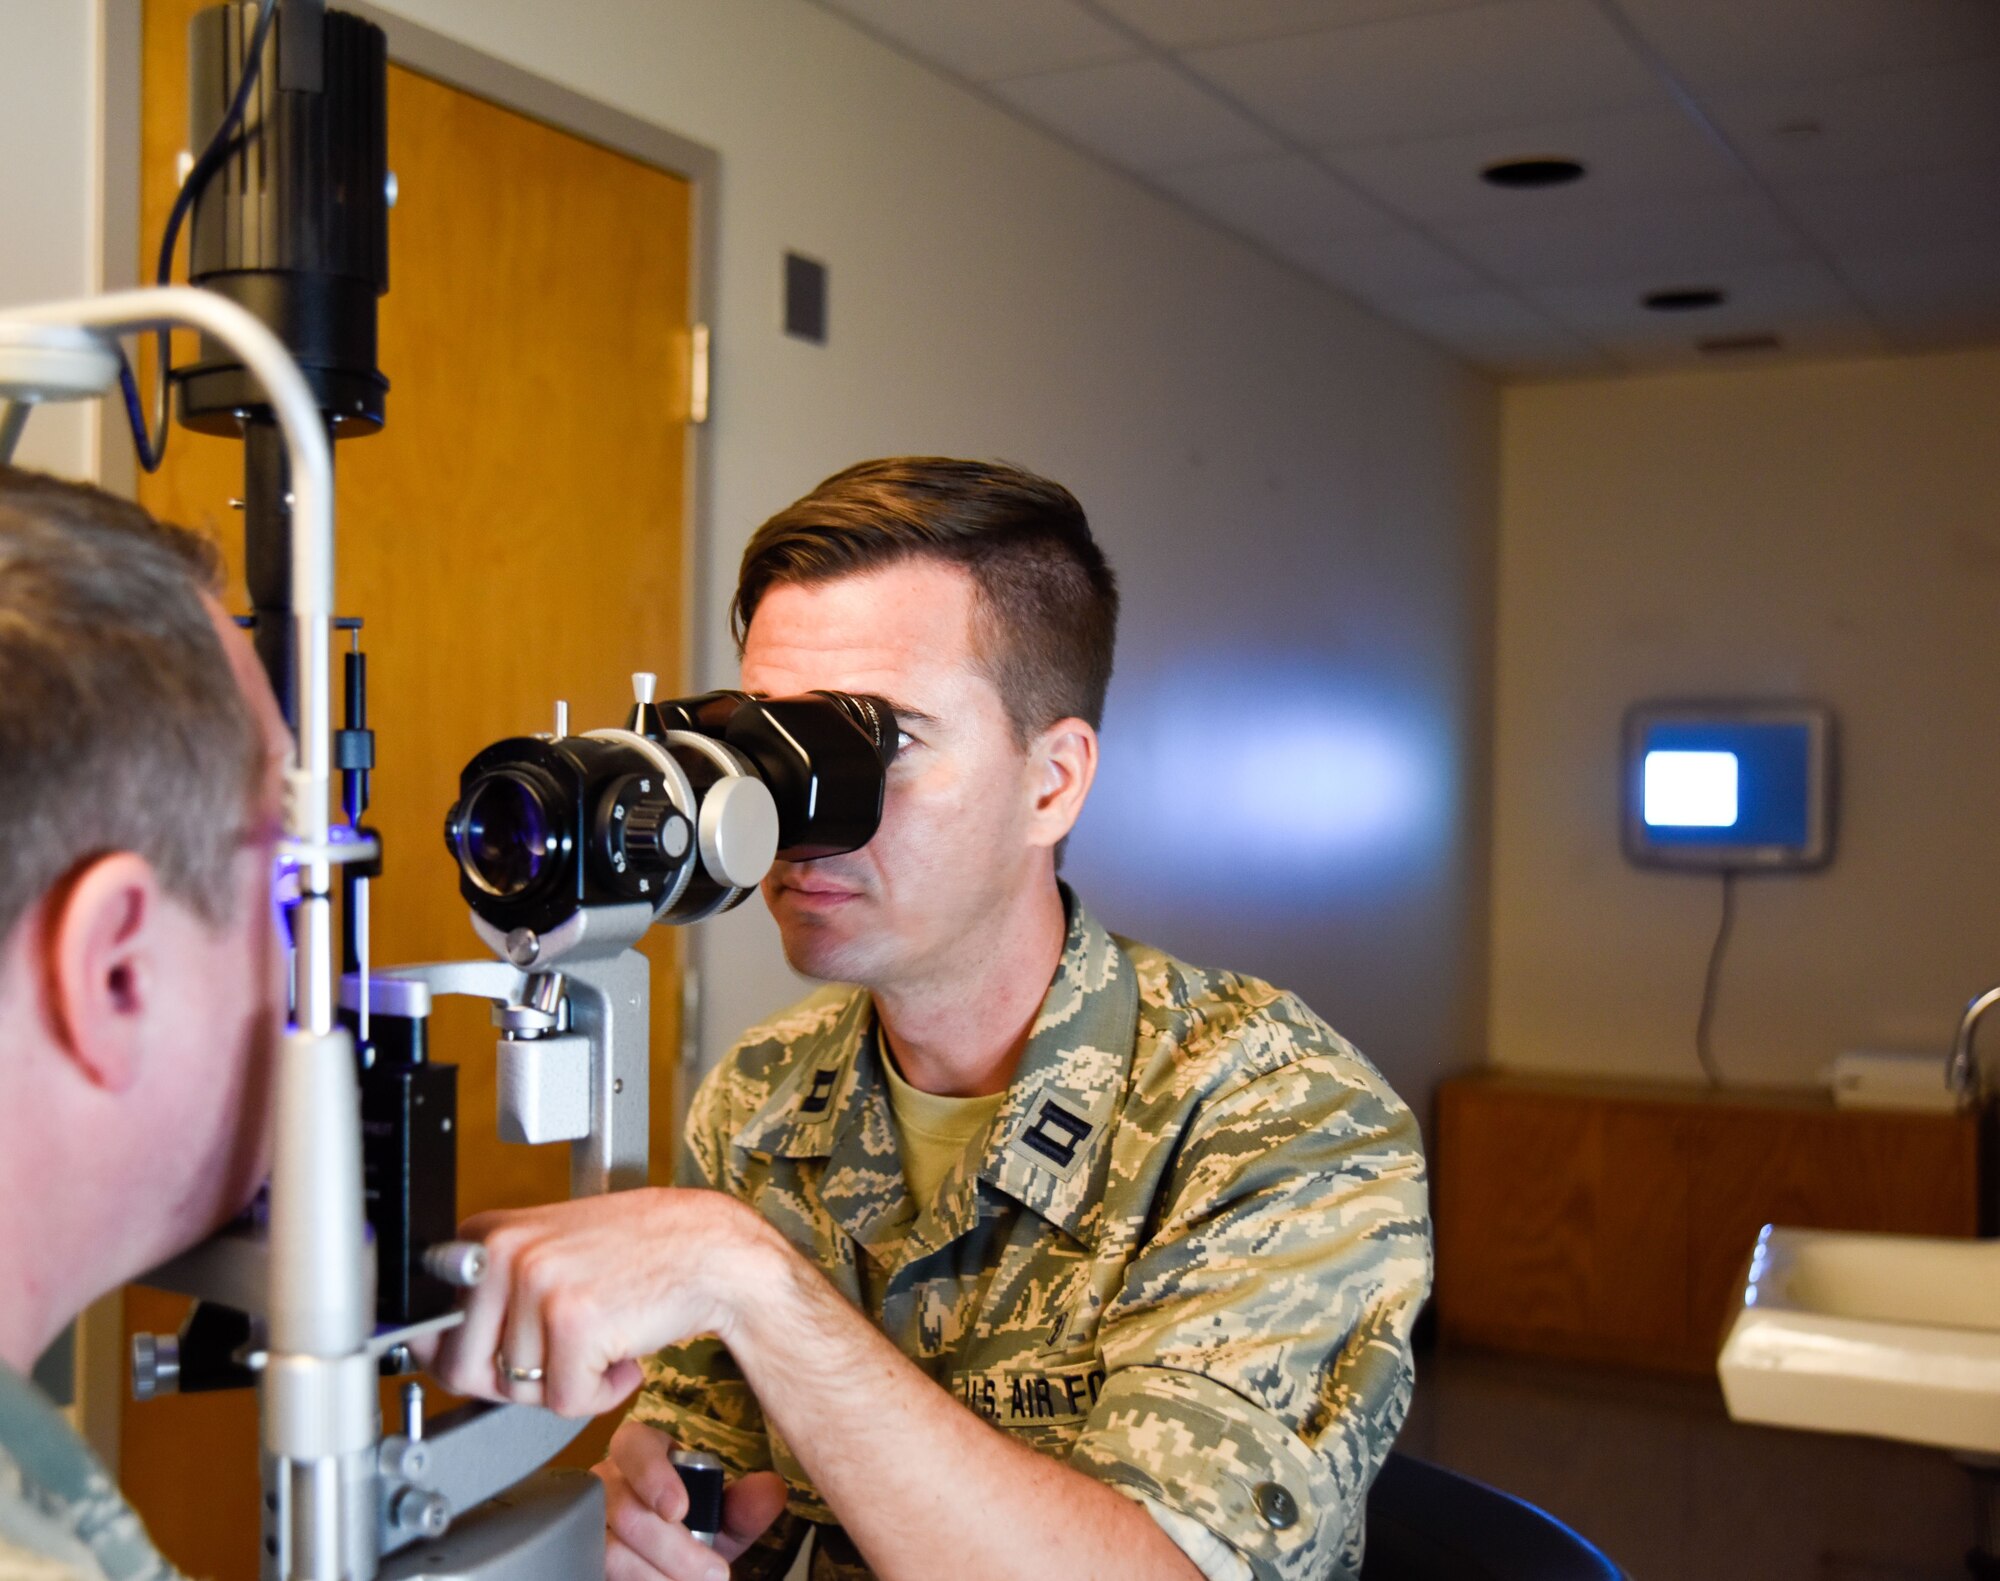 Capt. Brian Gill, 114th Medical Group optometrist, performs an eye exam on a patient at Schofield Health, Wahiawa, Hawaii Clinic, Jan. 17, 2017. Approximately 15 Airmen from the 114th Medical Group worked at Tripler Army Medical Center and Schofield Barracks Health Clinic. (U.S. Air National Guard photo by Staff Sgt. Duane Duimstra)